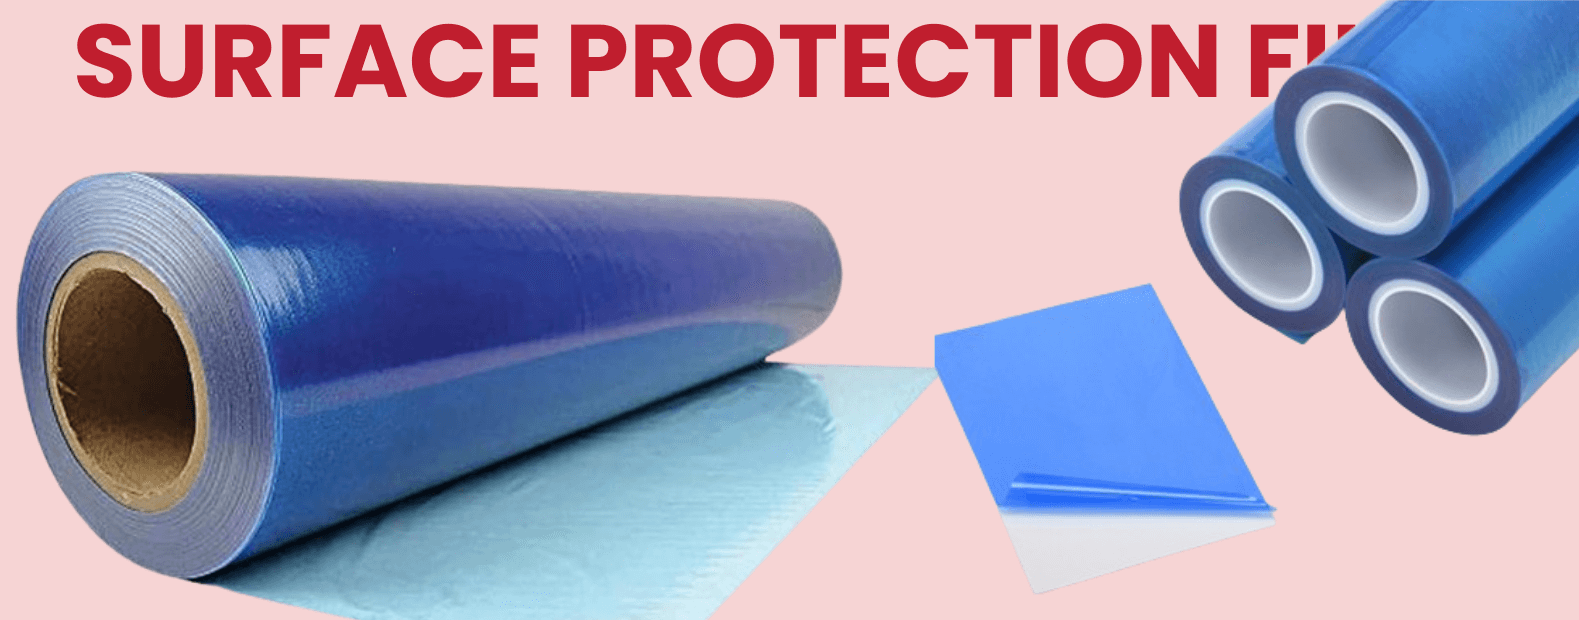 spf or surface protection film is used in industry like sunmica and steel sheet manufacturer for prtectiong thier sheet of metal and thus its excellent to use surface protection film manufacturerd by rohit polymer industries manesar haryana gurgain bhiwadi behror bawal bhiwadi neemrana noida faridabad